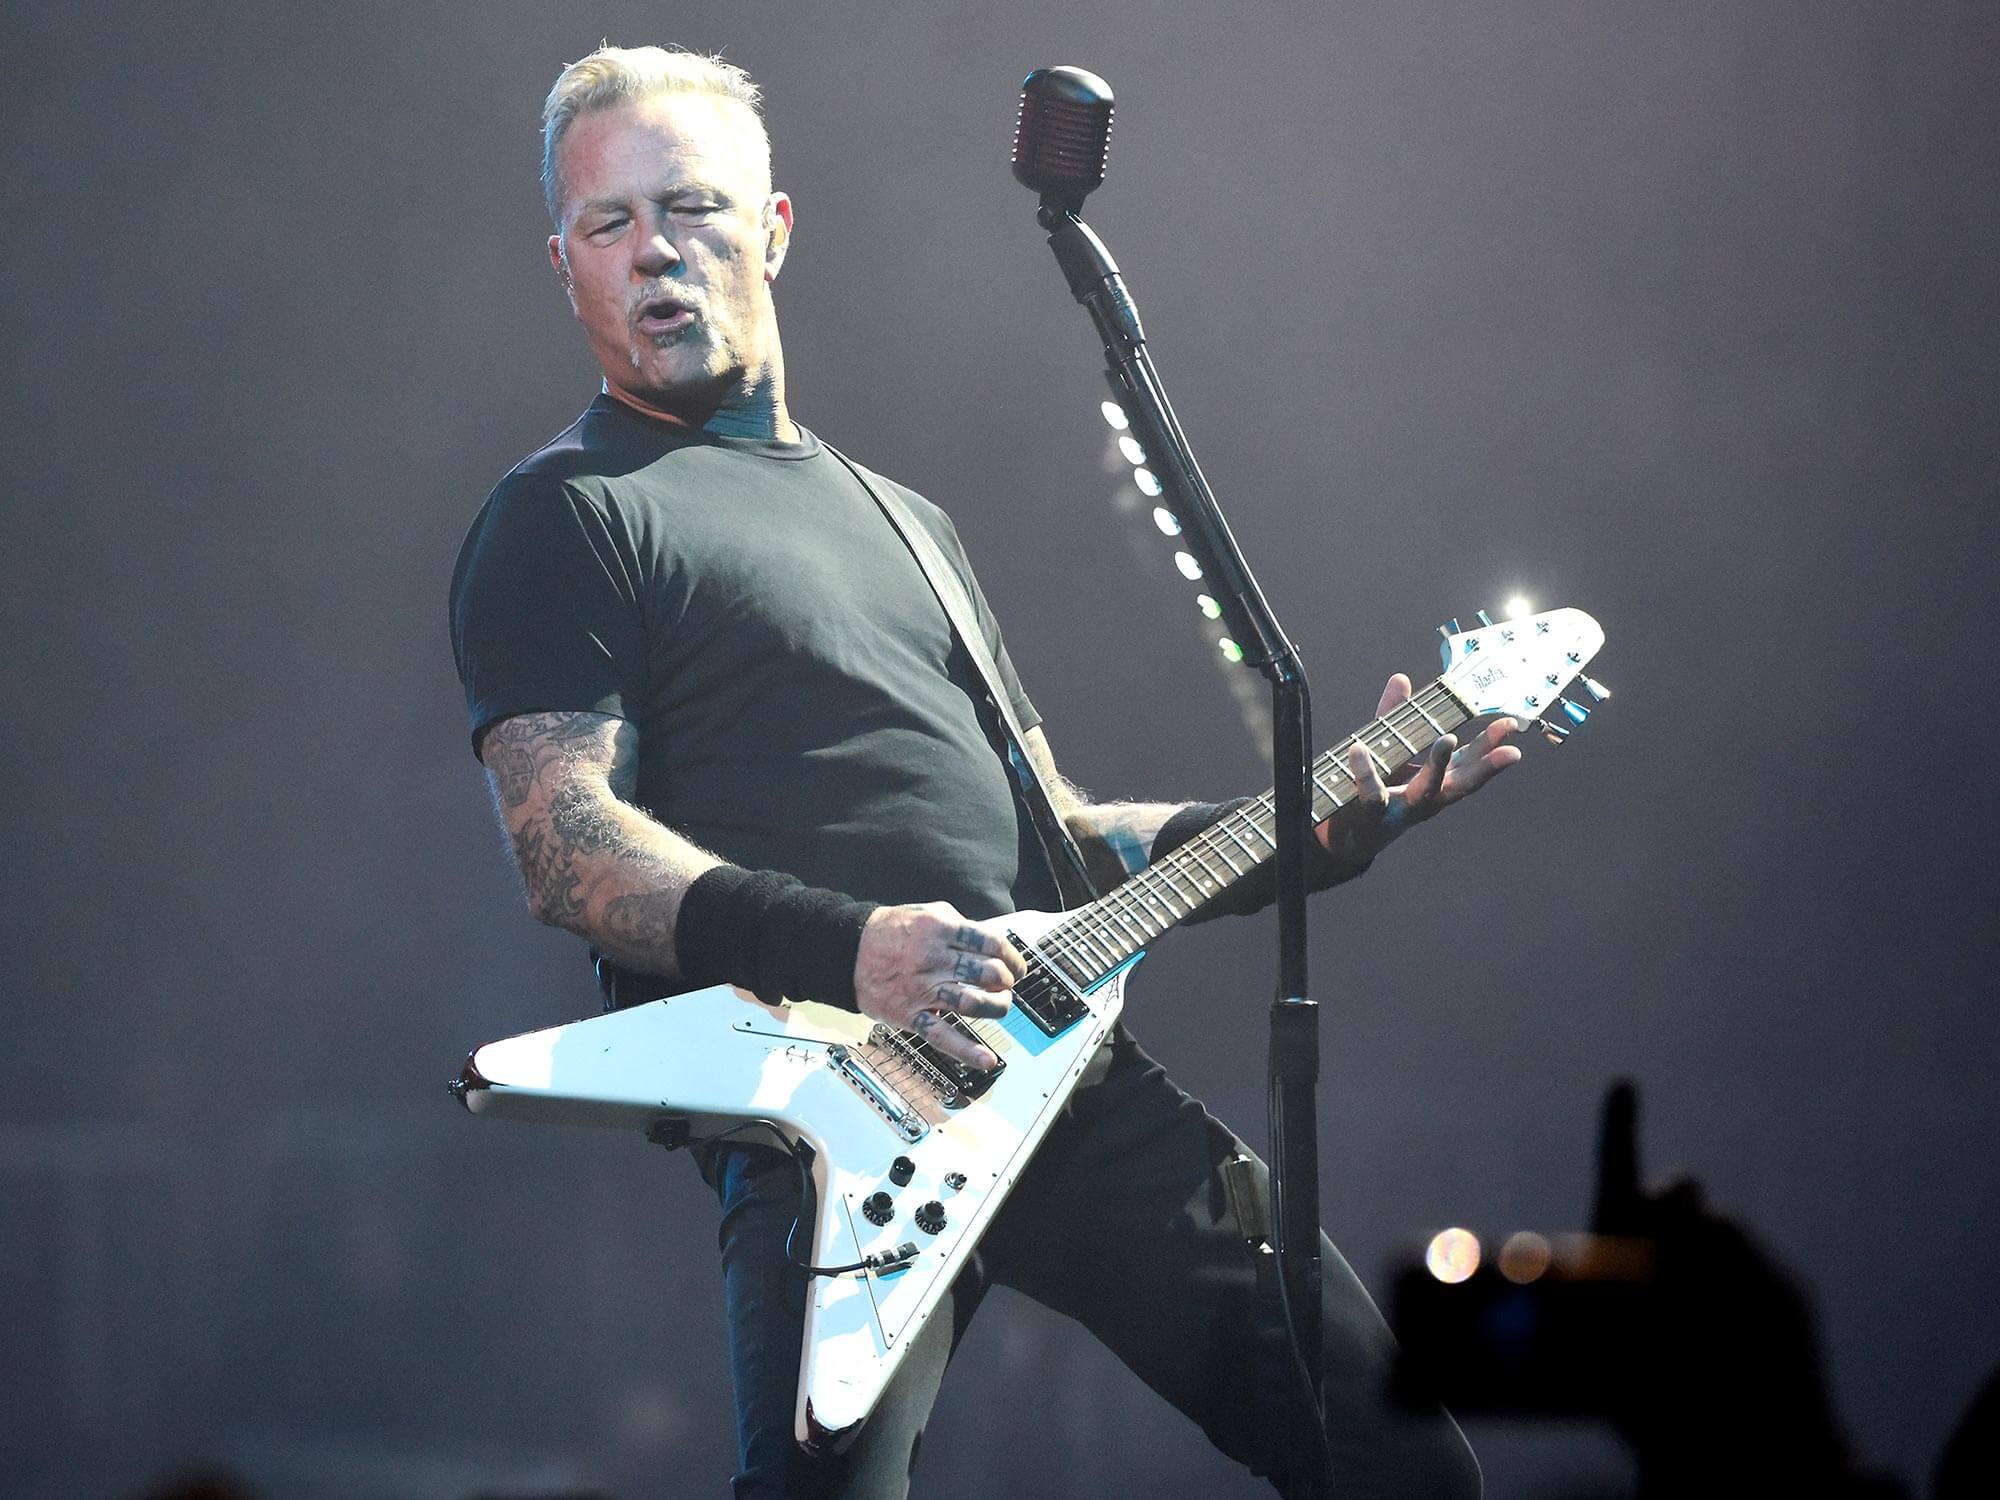 dvs. Fritid År Metallica group hug: James Hetfield gets emotional onstage about playing  confidence, shares hug with band | Guitar.com | All Things Guitar